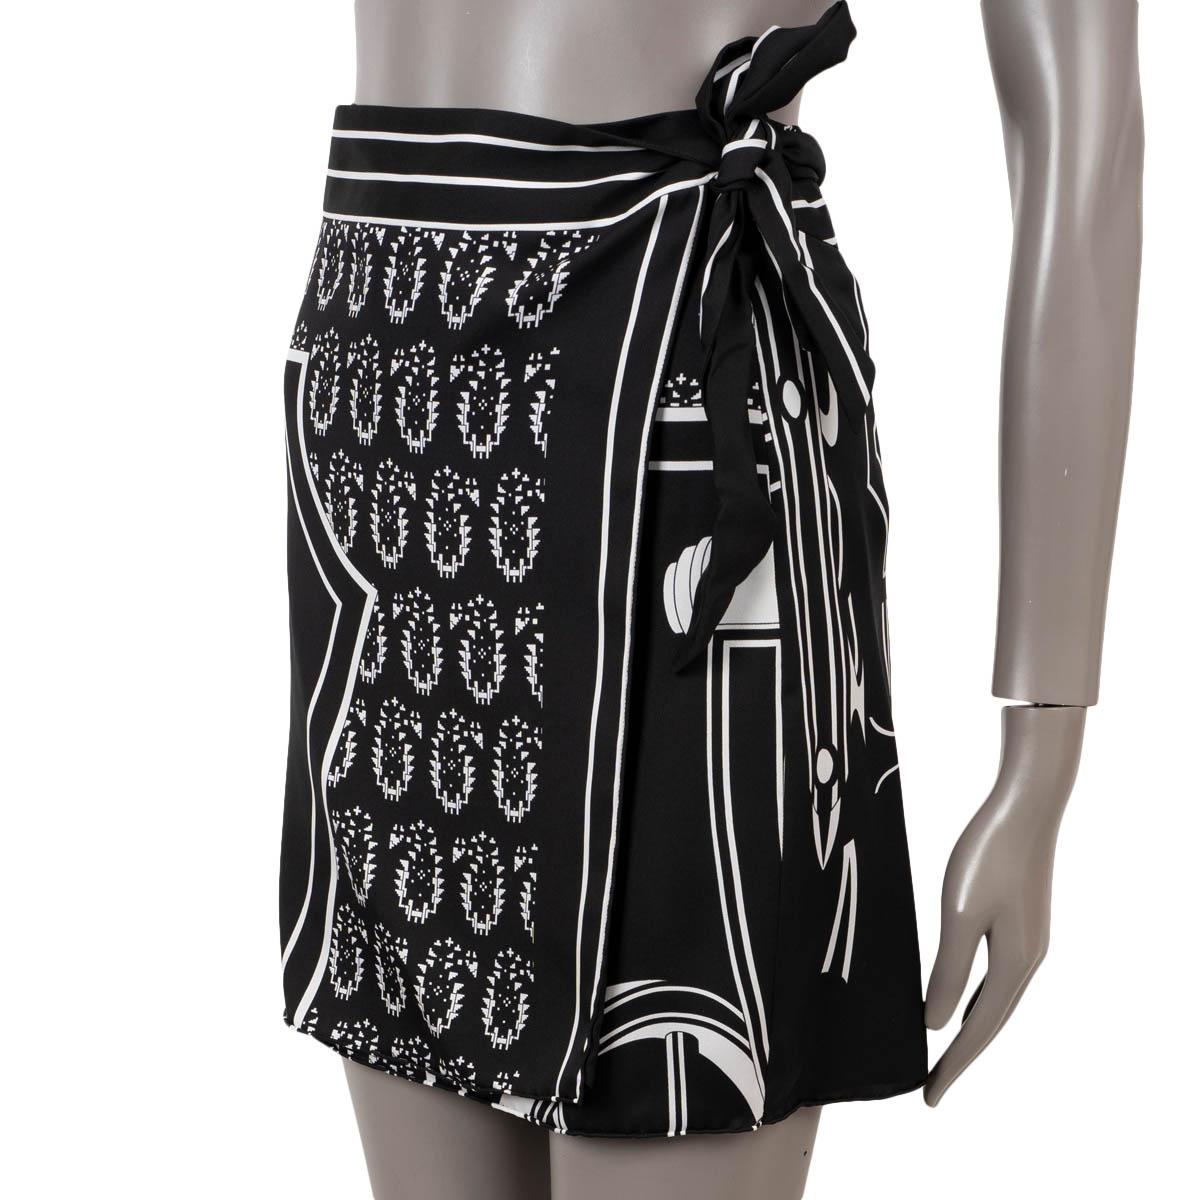 100% authentic Hermès wrap mini skirt in black and white silk (100%) with Les Roues de Phaeton print. Closes with conceled buttons and ties on the side. Has been worn and is in excellent condition.

Complete the look with matching blouse available